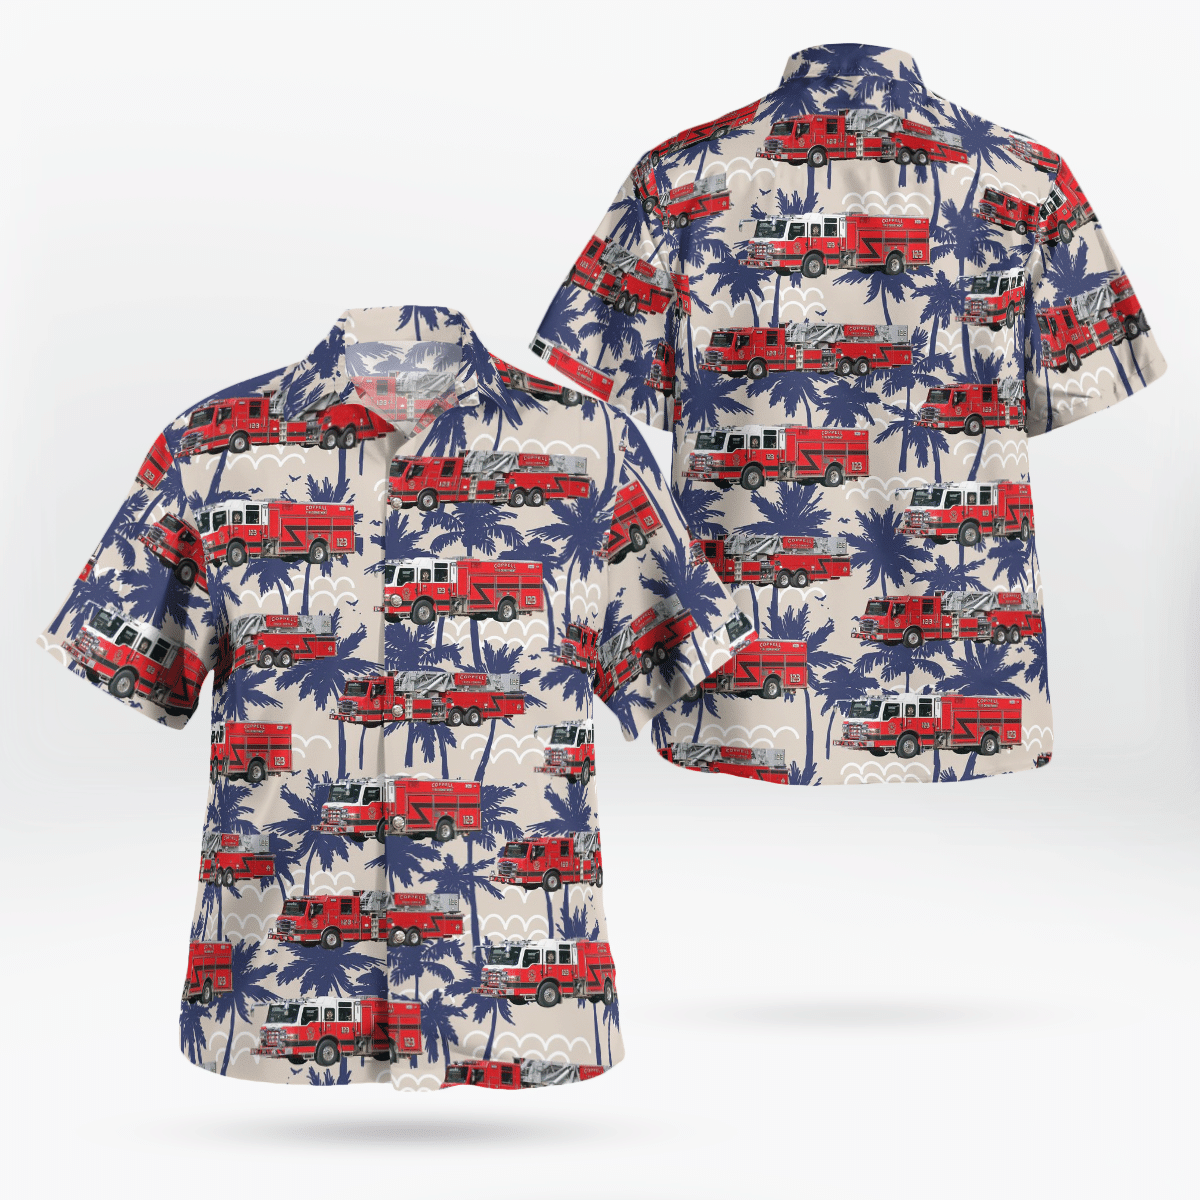 If you want to be noticed, wear These Trendy Hawaiian Shirt 68